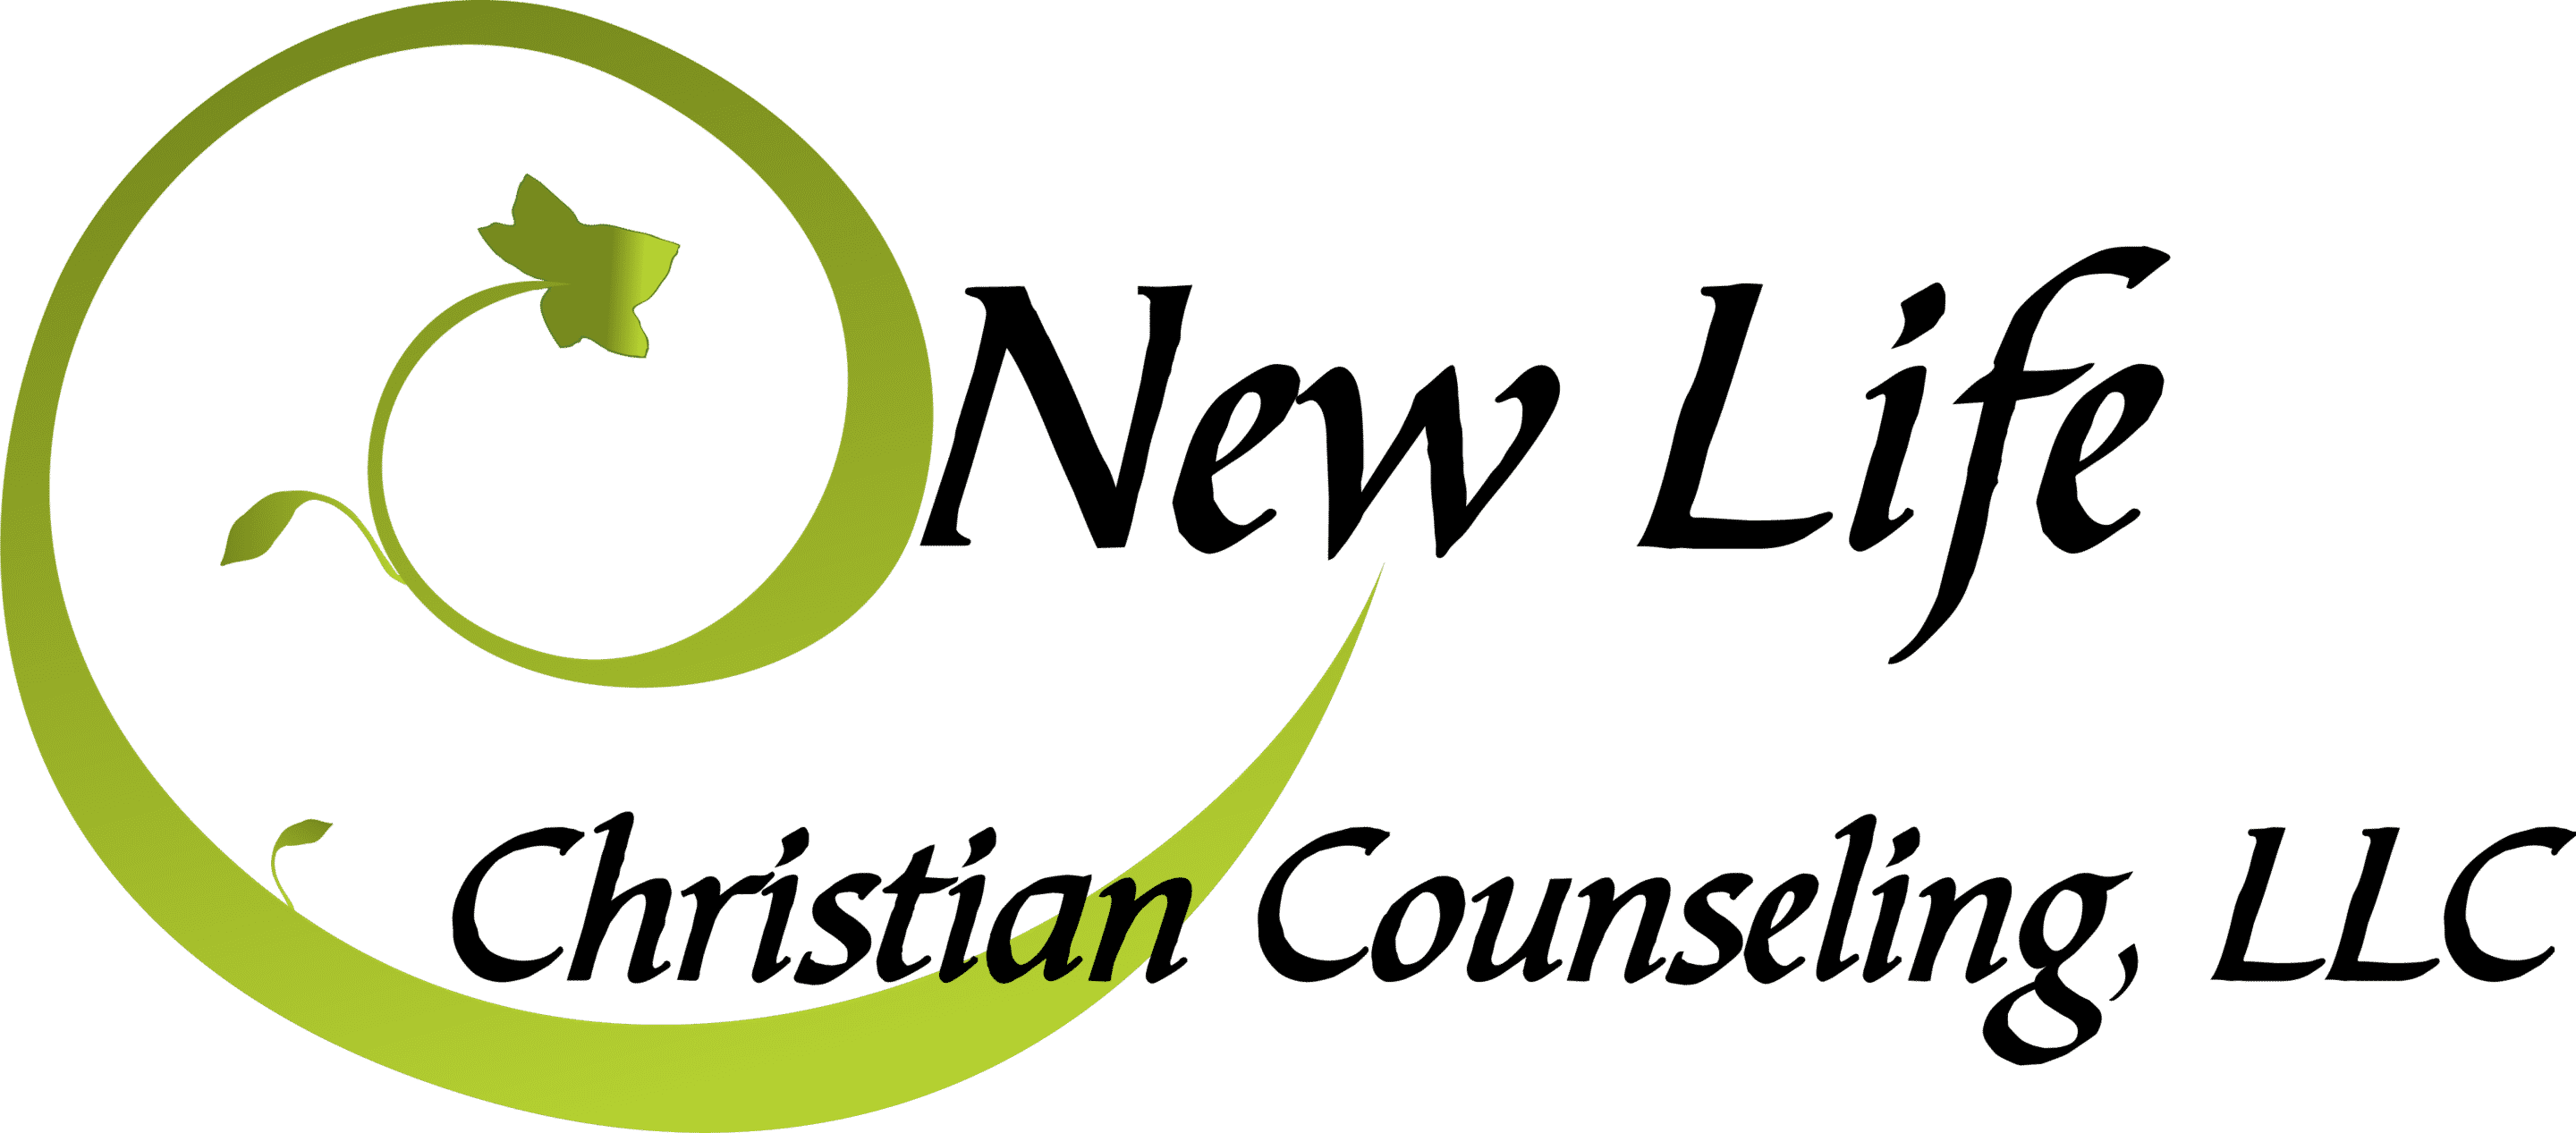 New Life Christian Counseling